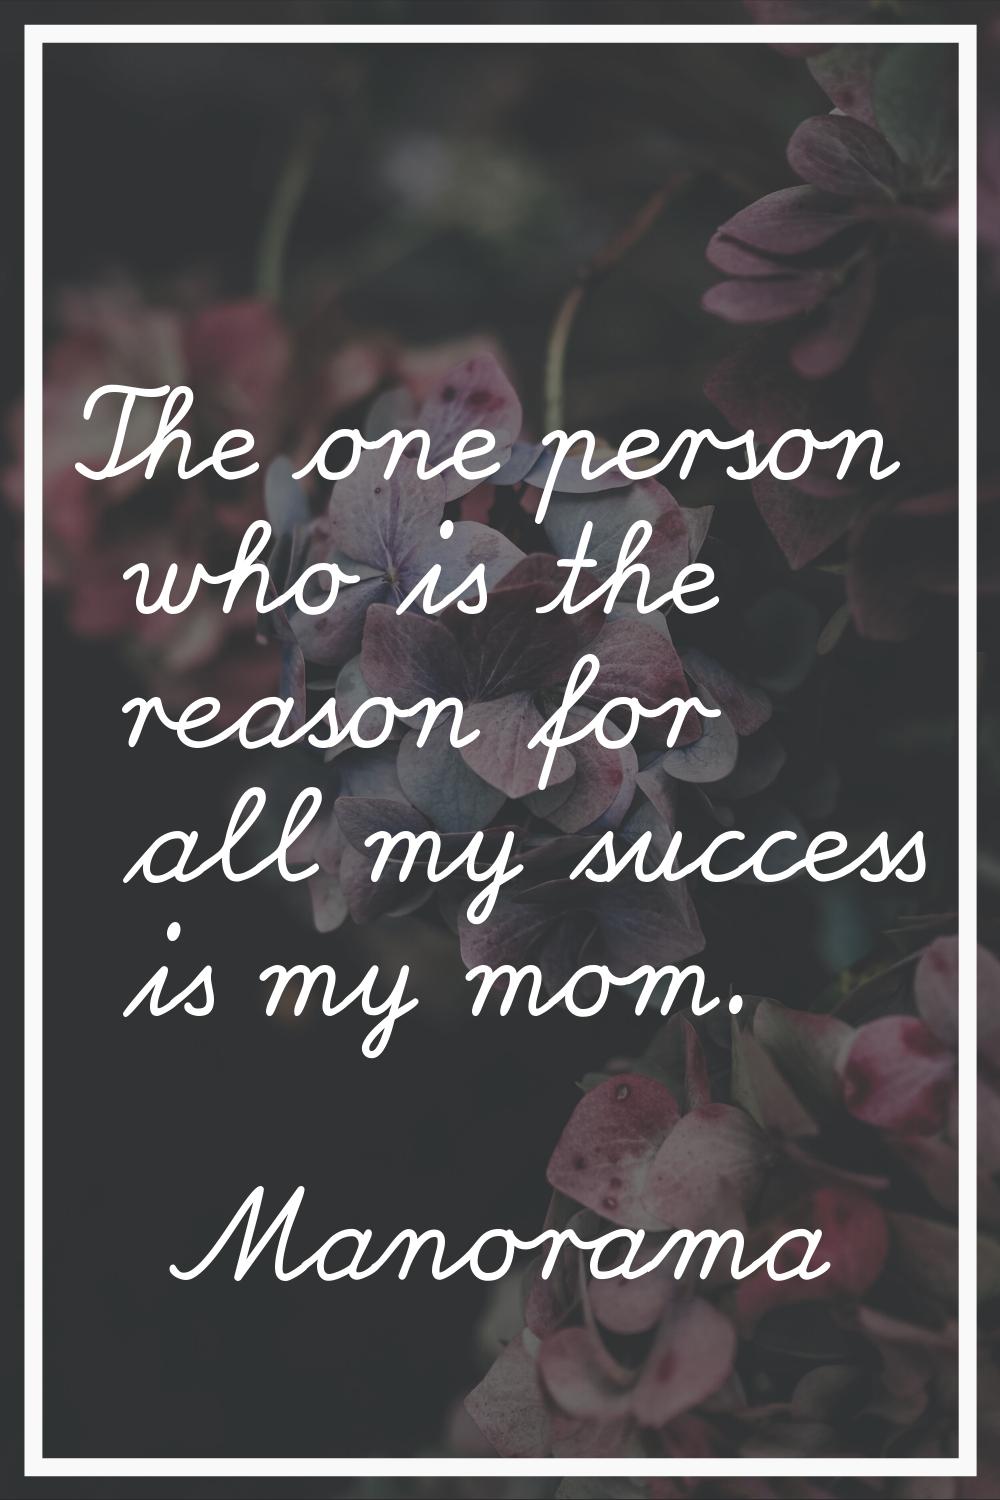 The one person who is the reason for all my success is my mom.